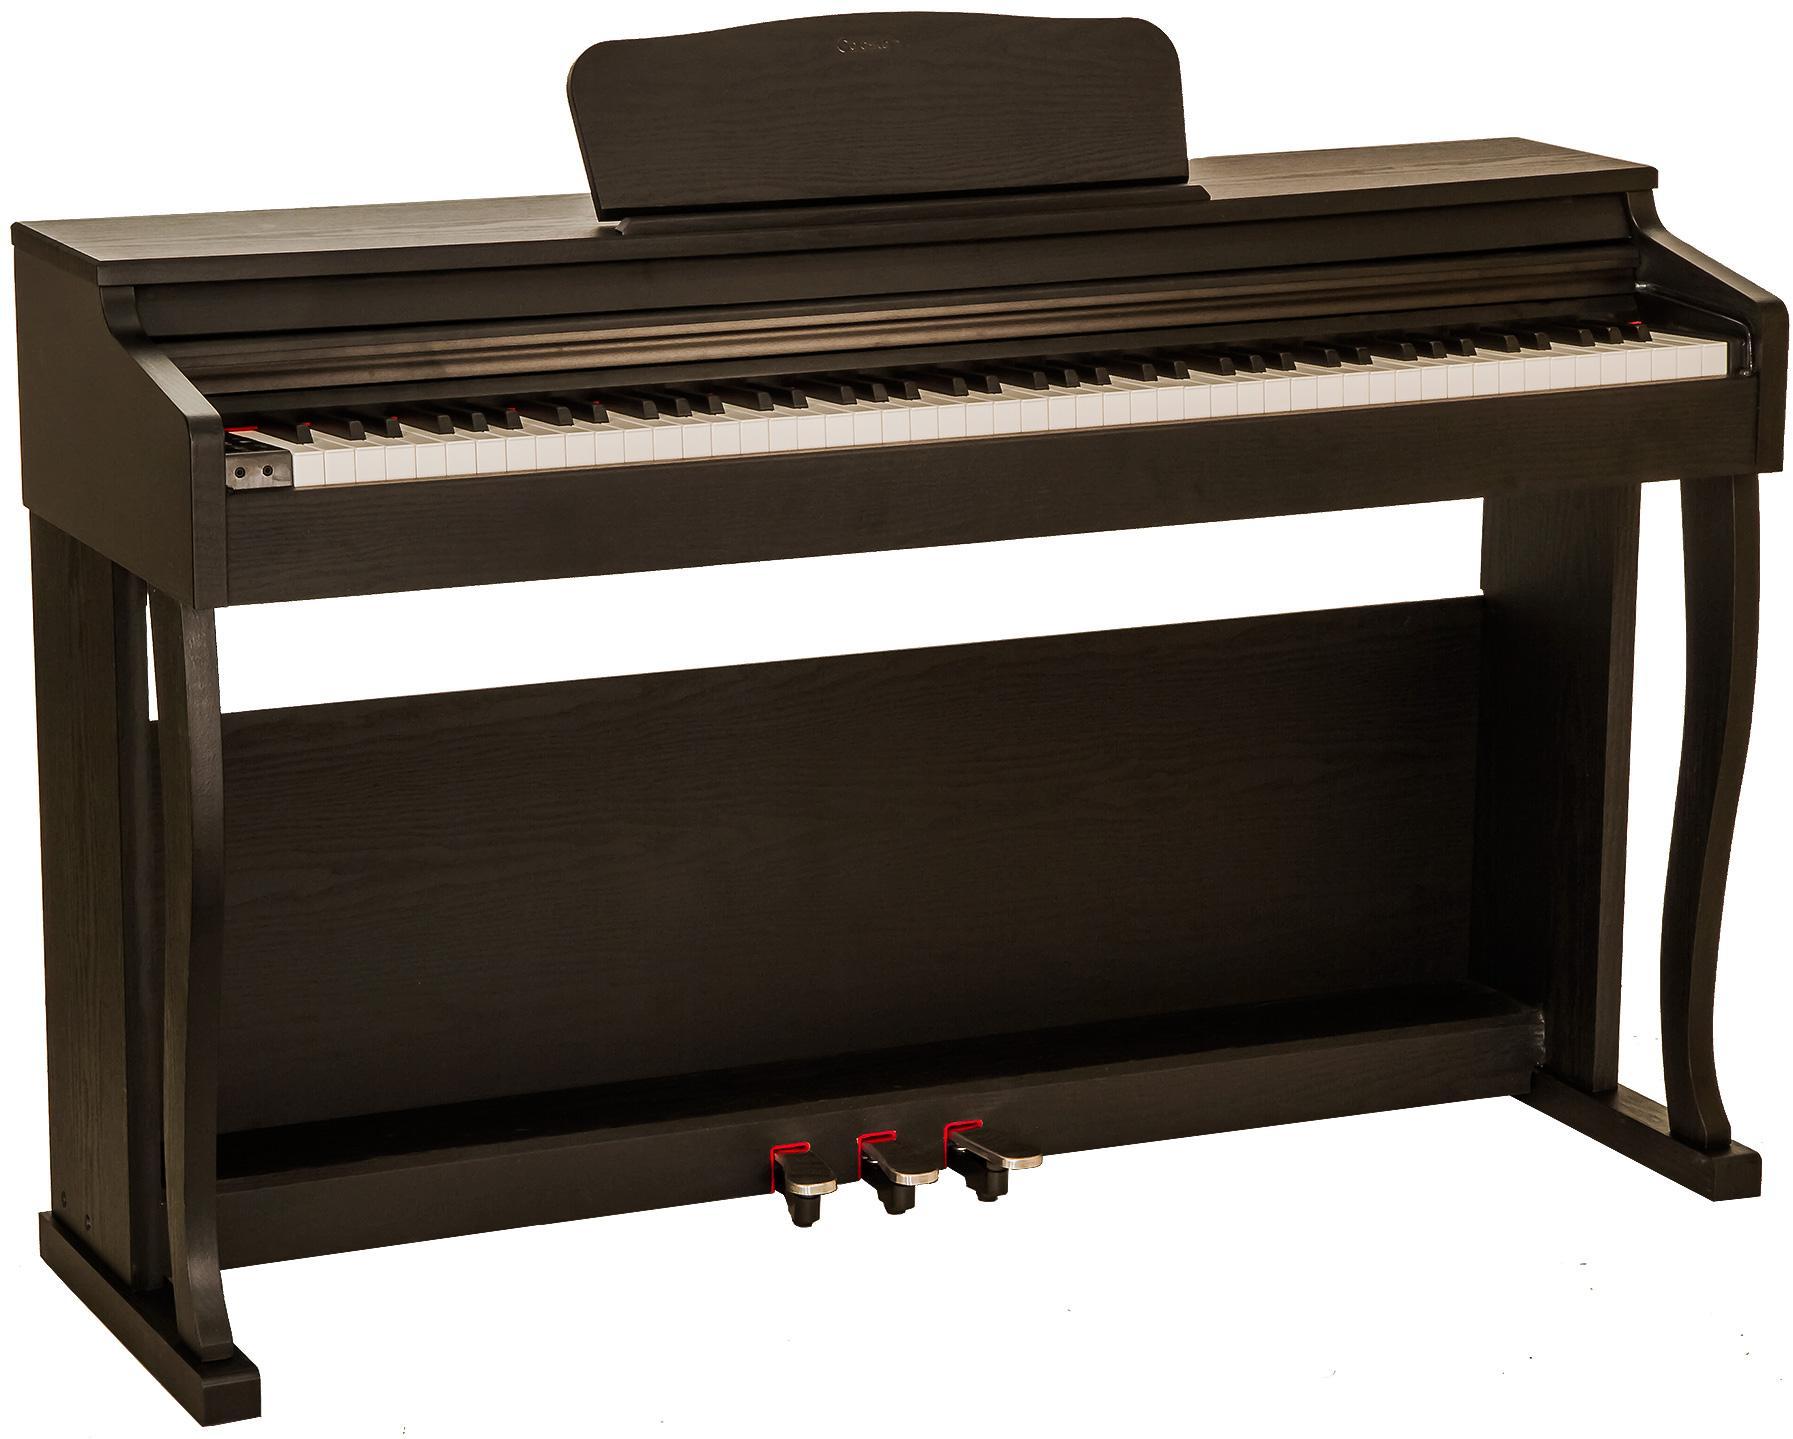 Digital piano with stand Goldstein GLP-12 - Noir